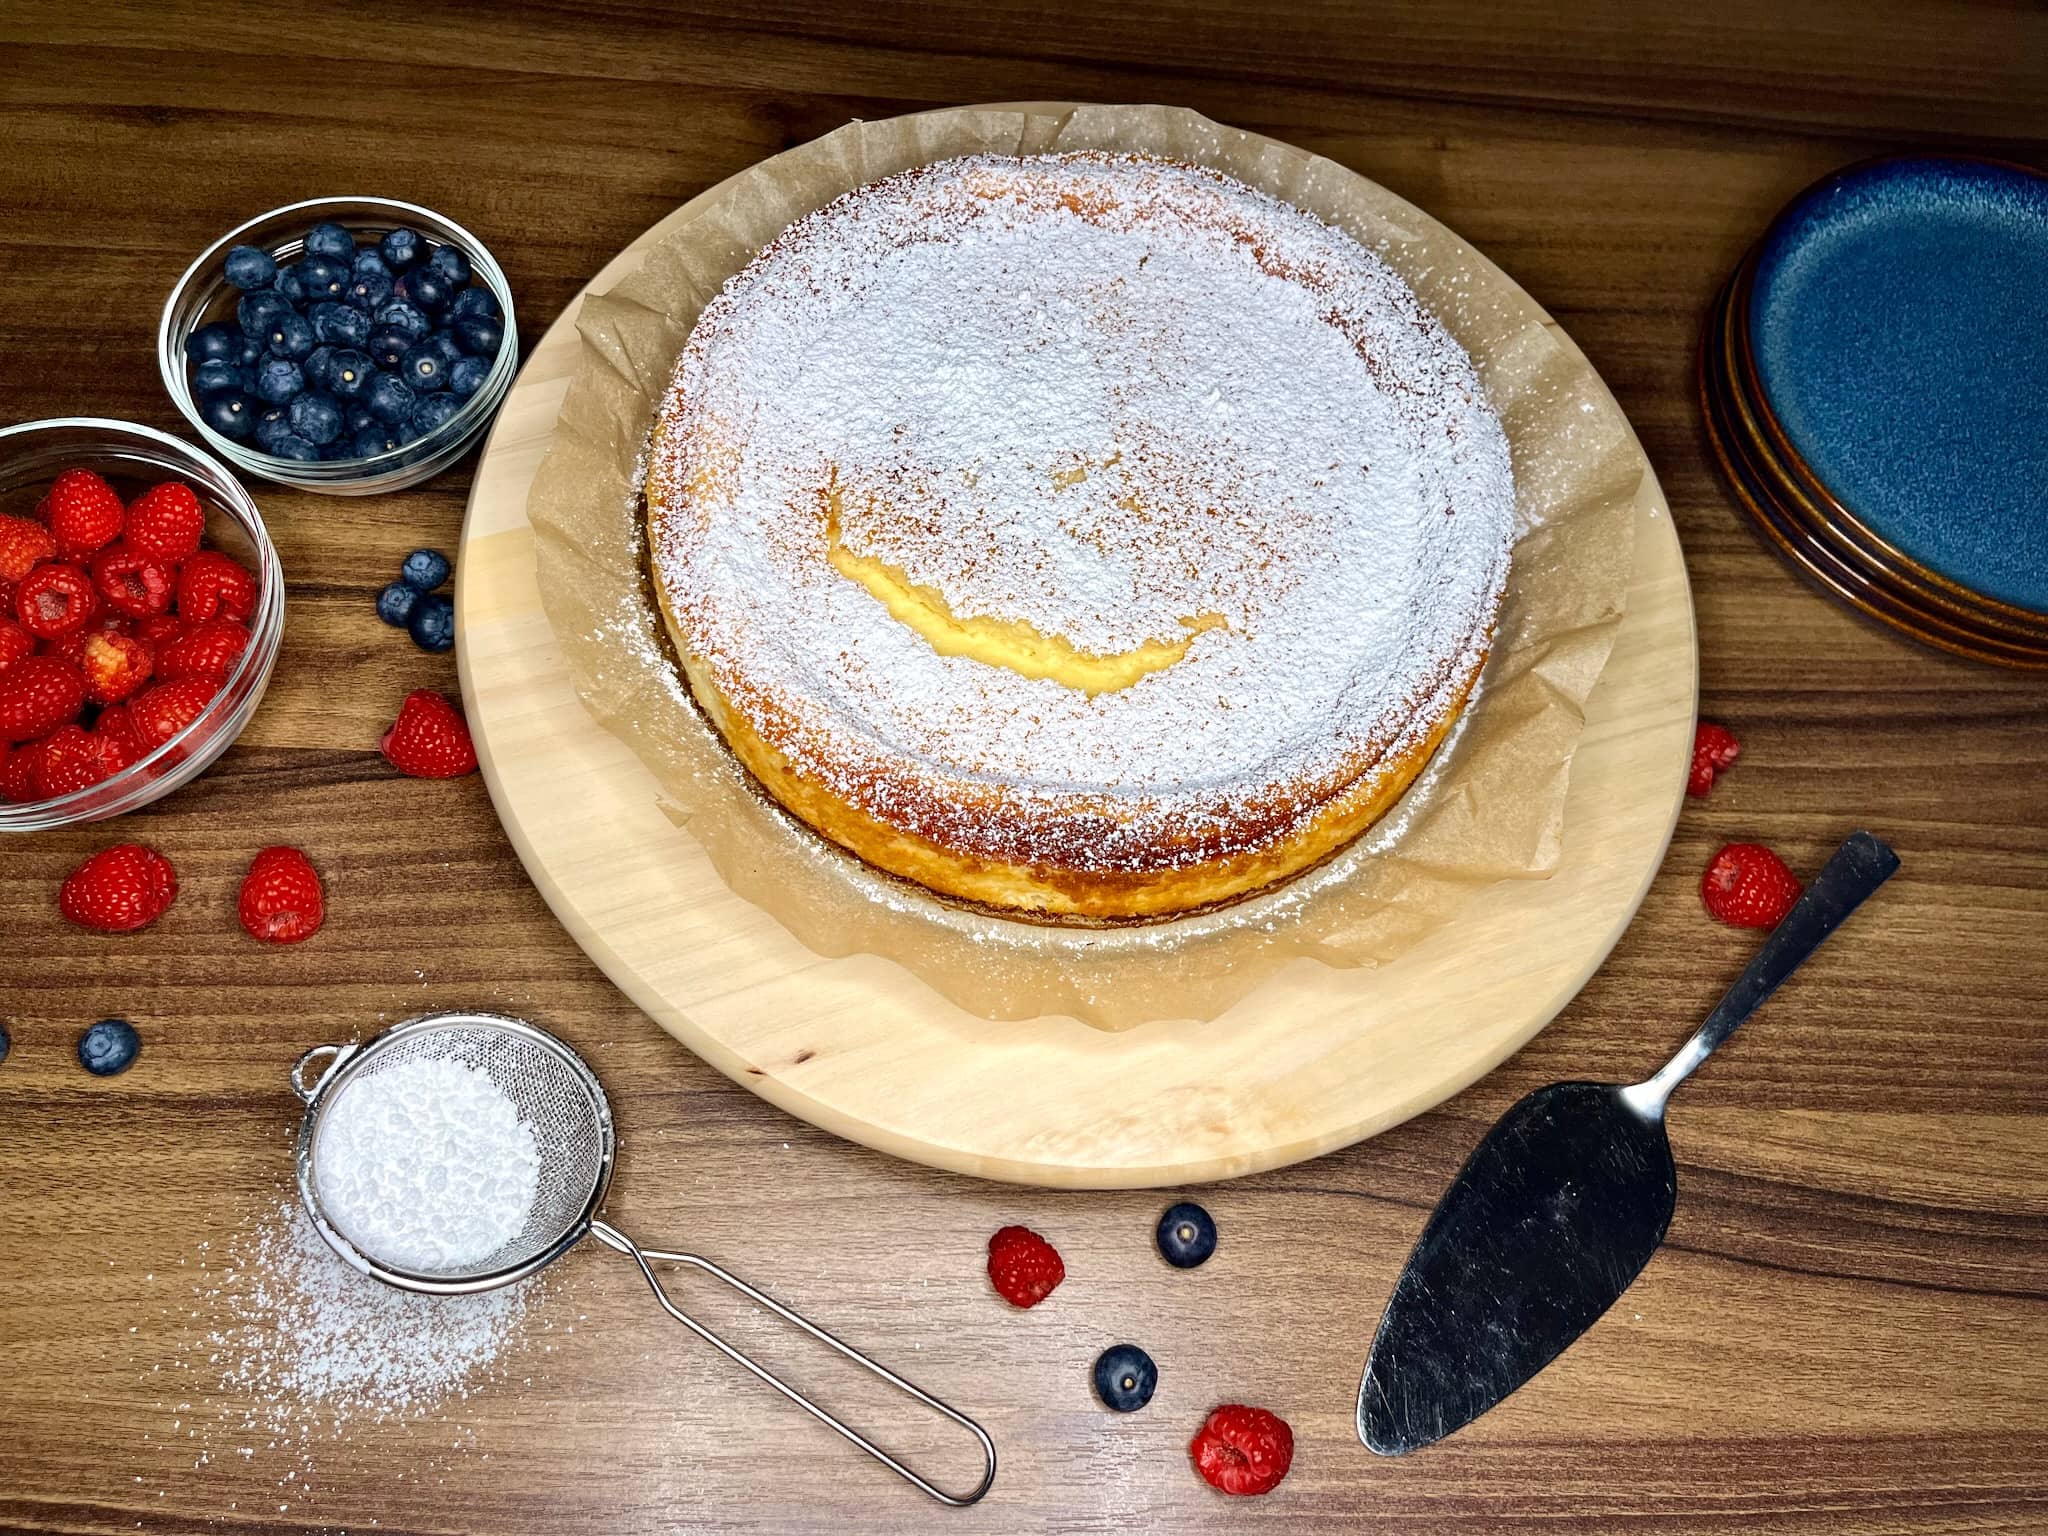 Creamy cheesecake, dusted with sugar, rests on a chopping board